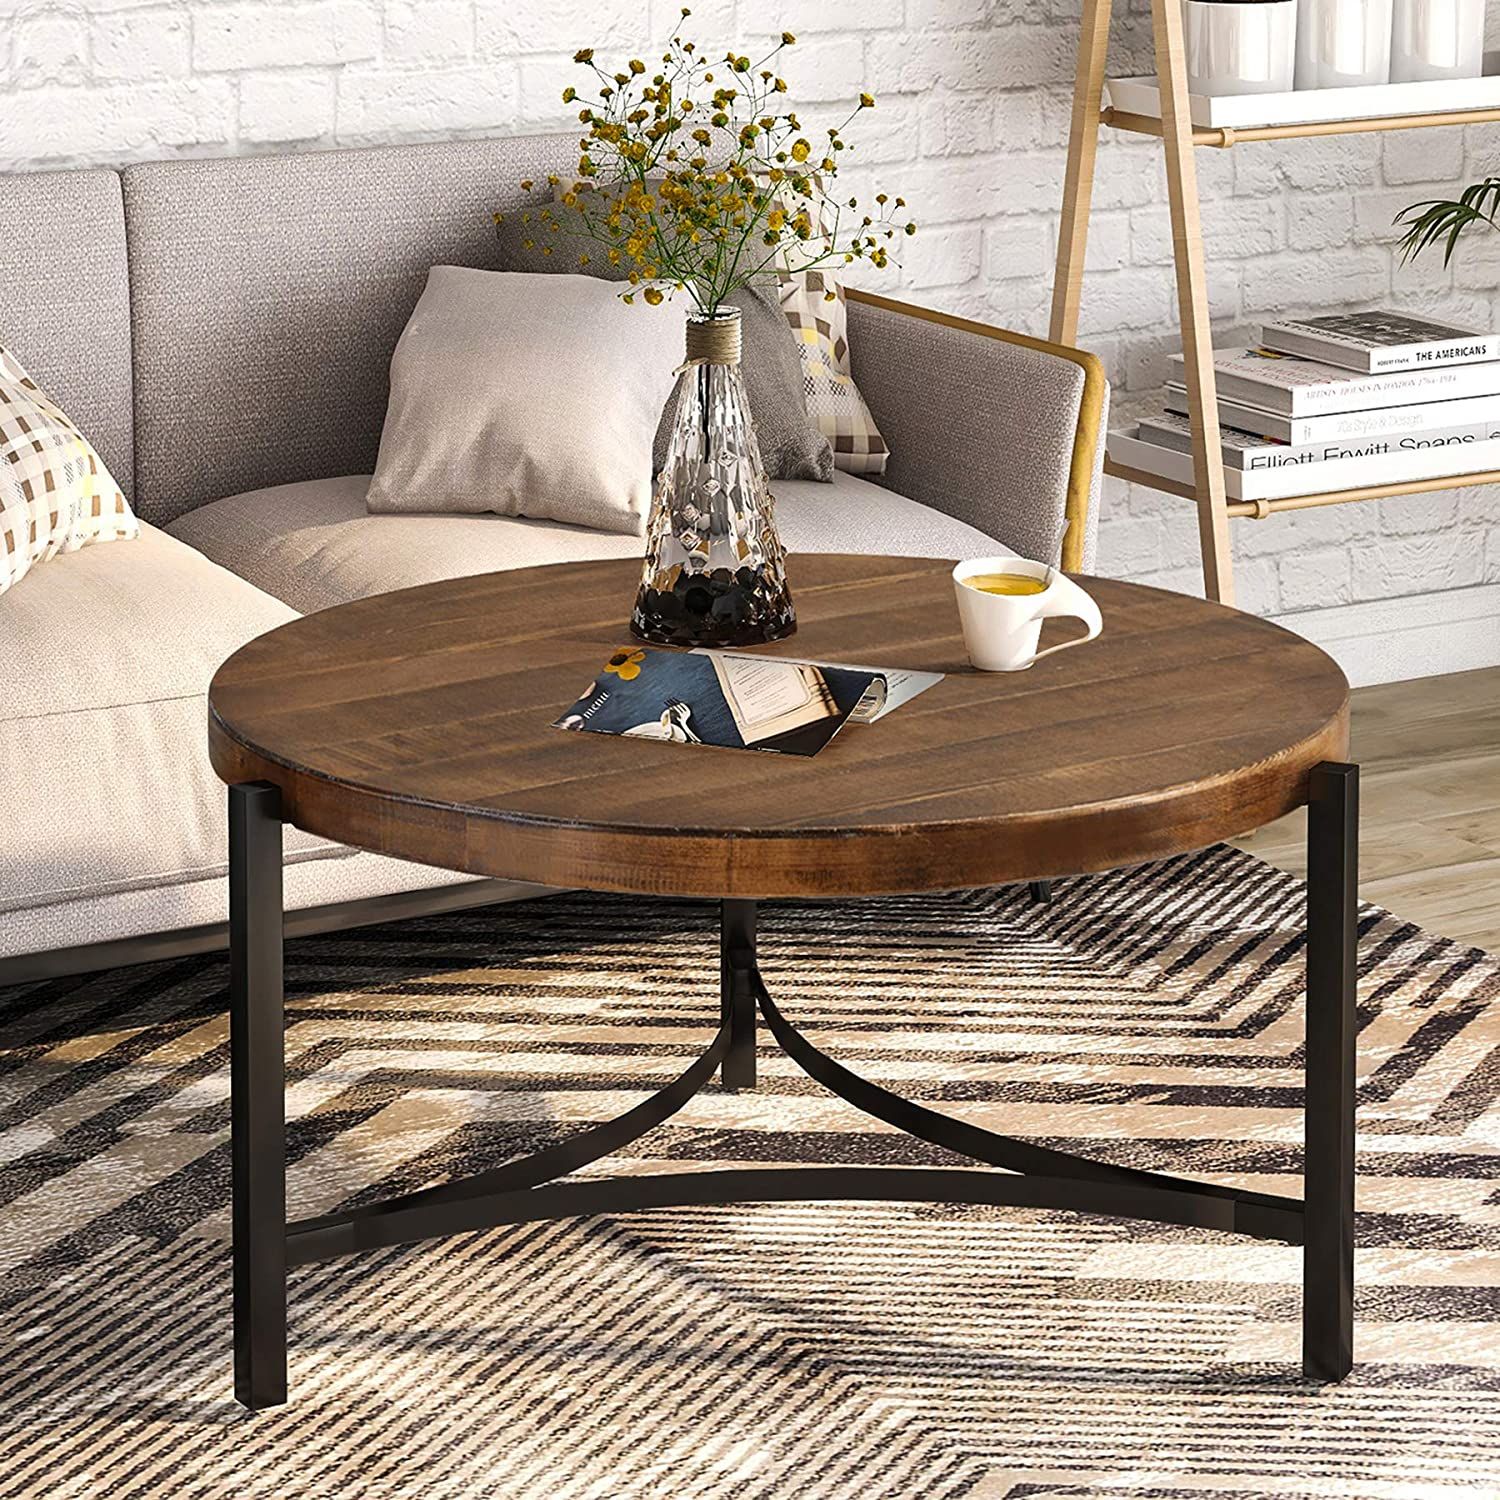 Round Coffee Table Rustic Style Table With Wood Desktop Metal Frame For  Living Room (brown) – Buy Hammered Metal Coffee Table,coffee Table  30x30,glass Coffee Table With Metal Frame Product On Alibaba Pertaining To Rustic Round Coffee Tables (View 17 of 20)